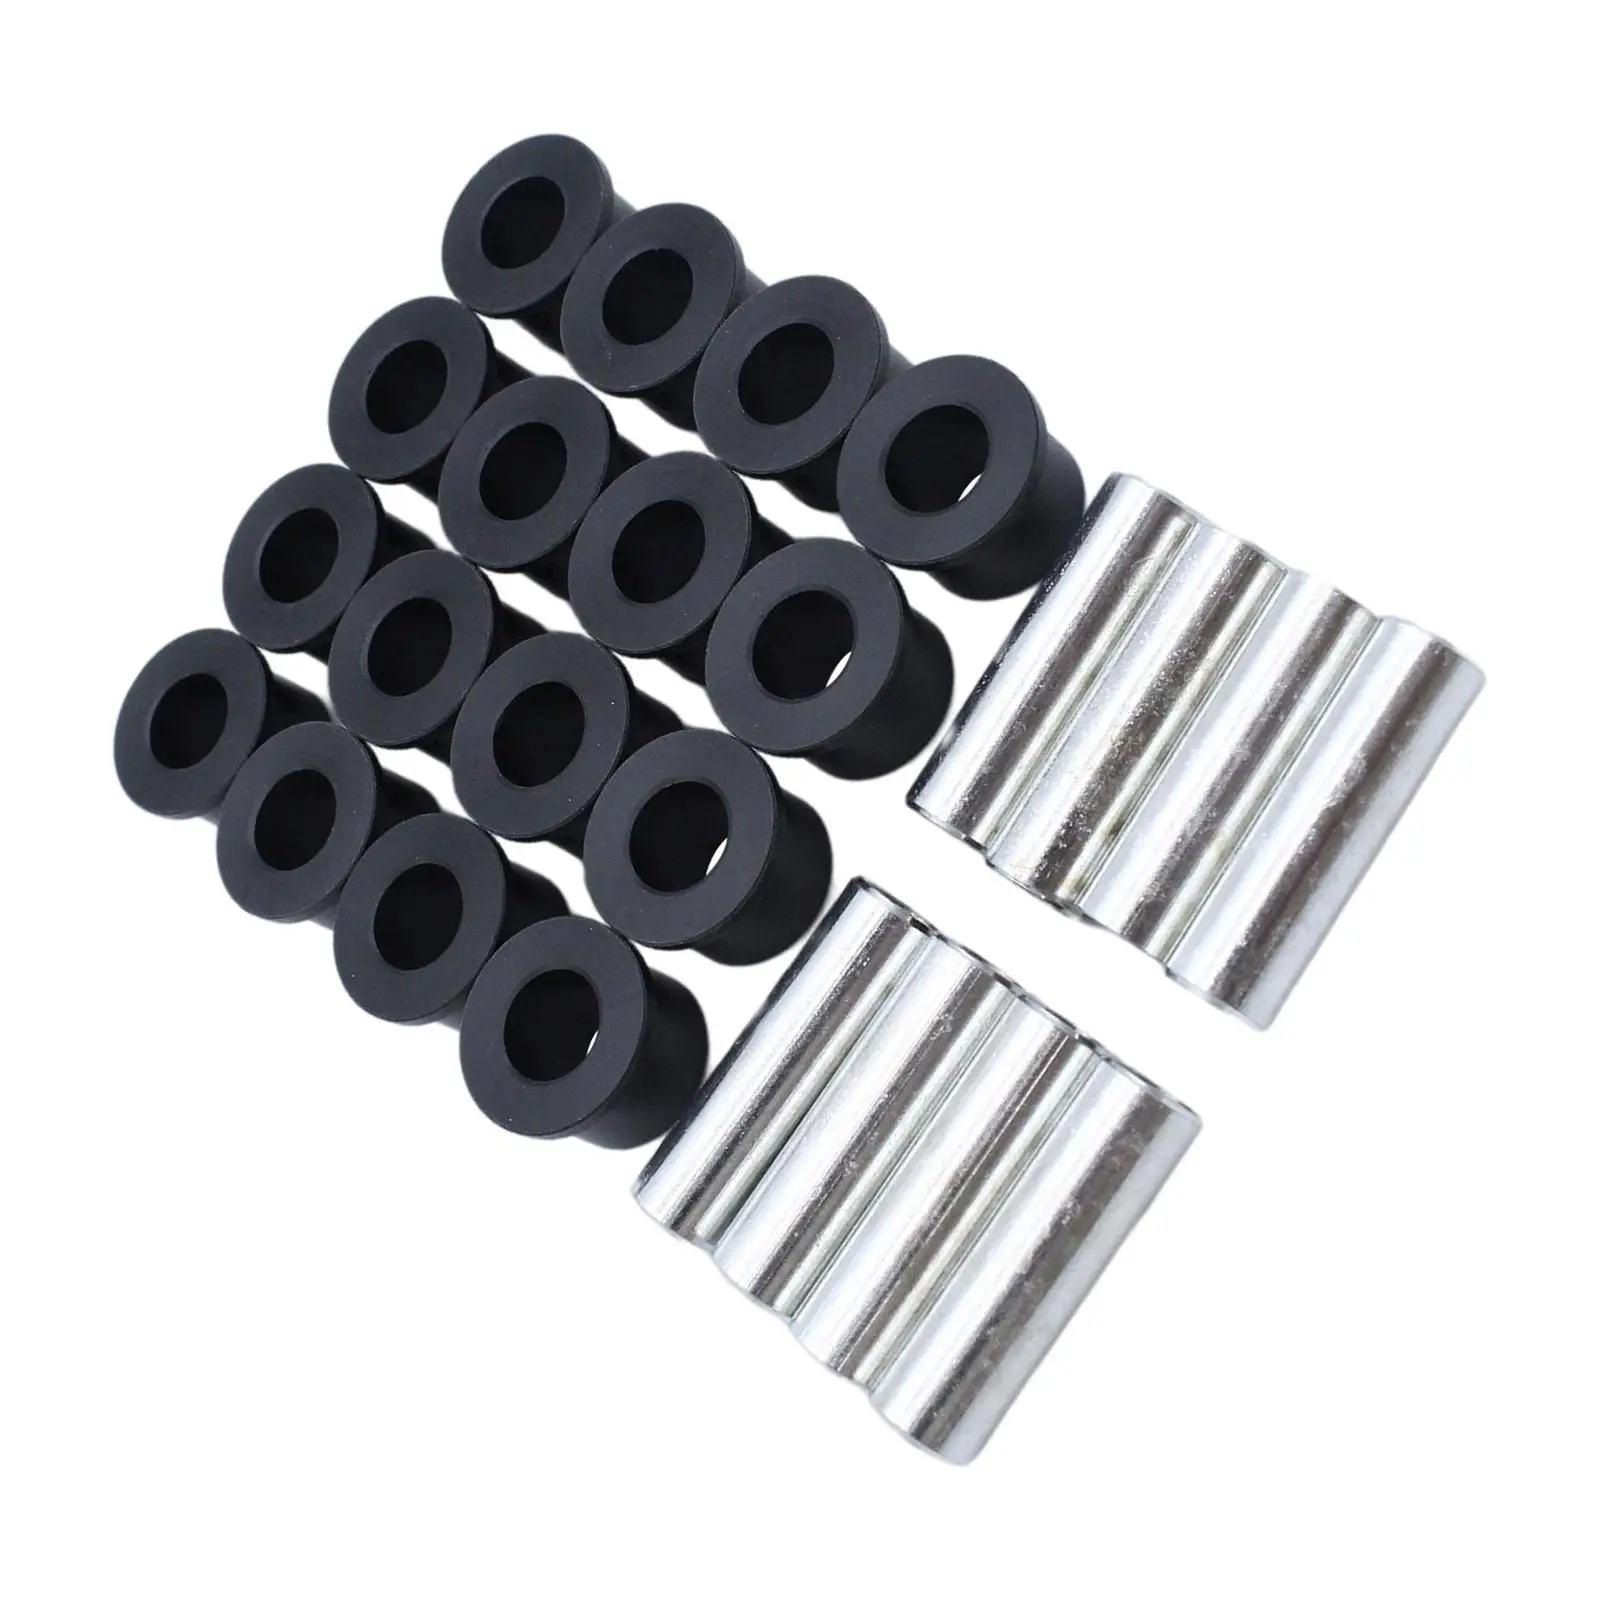 Car Set Throttle Shaft Bushing Direct Replaces fits for TRX400X 2012